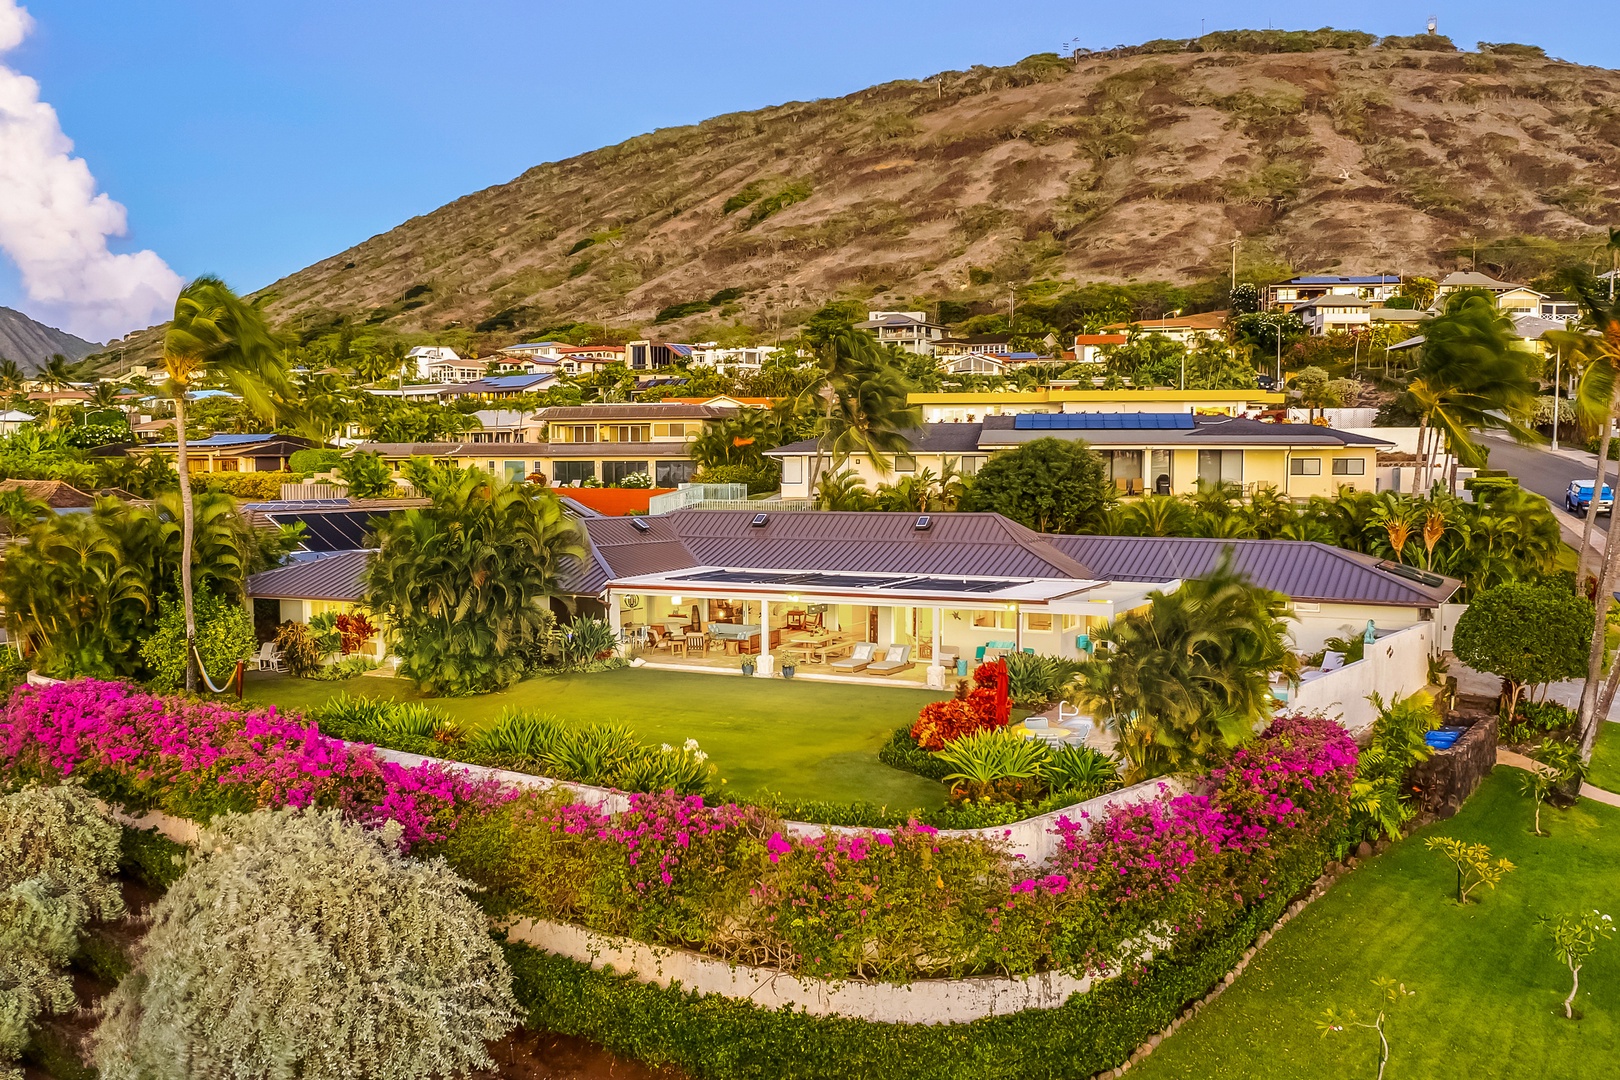 Honolulu Vacation Rentals, Hale Ola - Admire all the perfect landscape